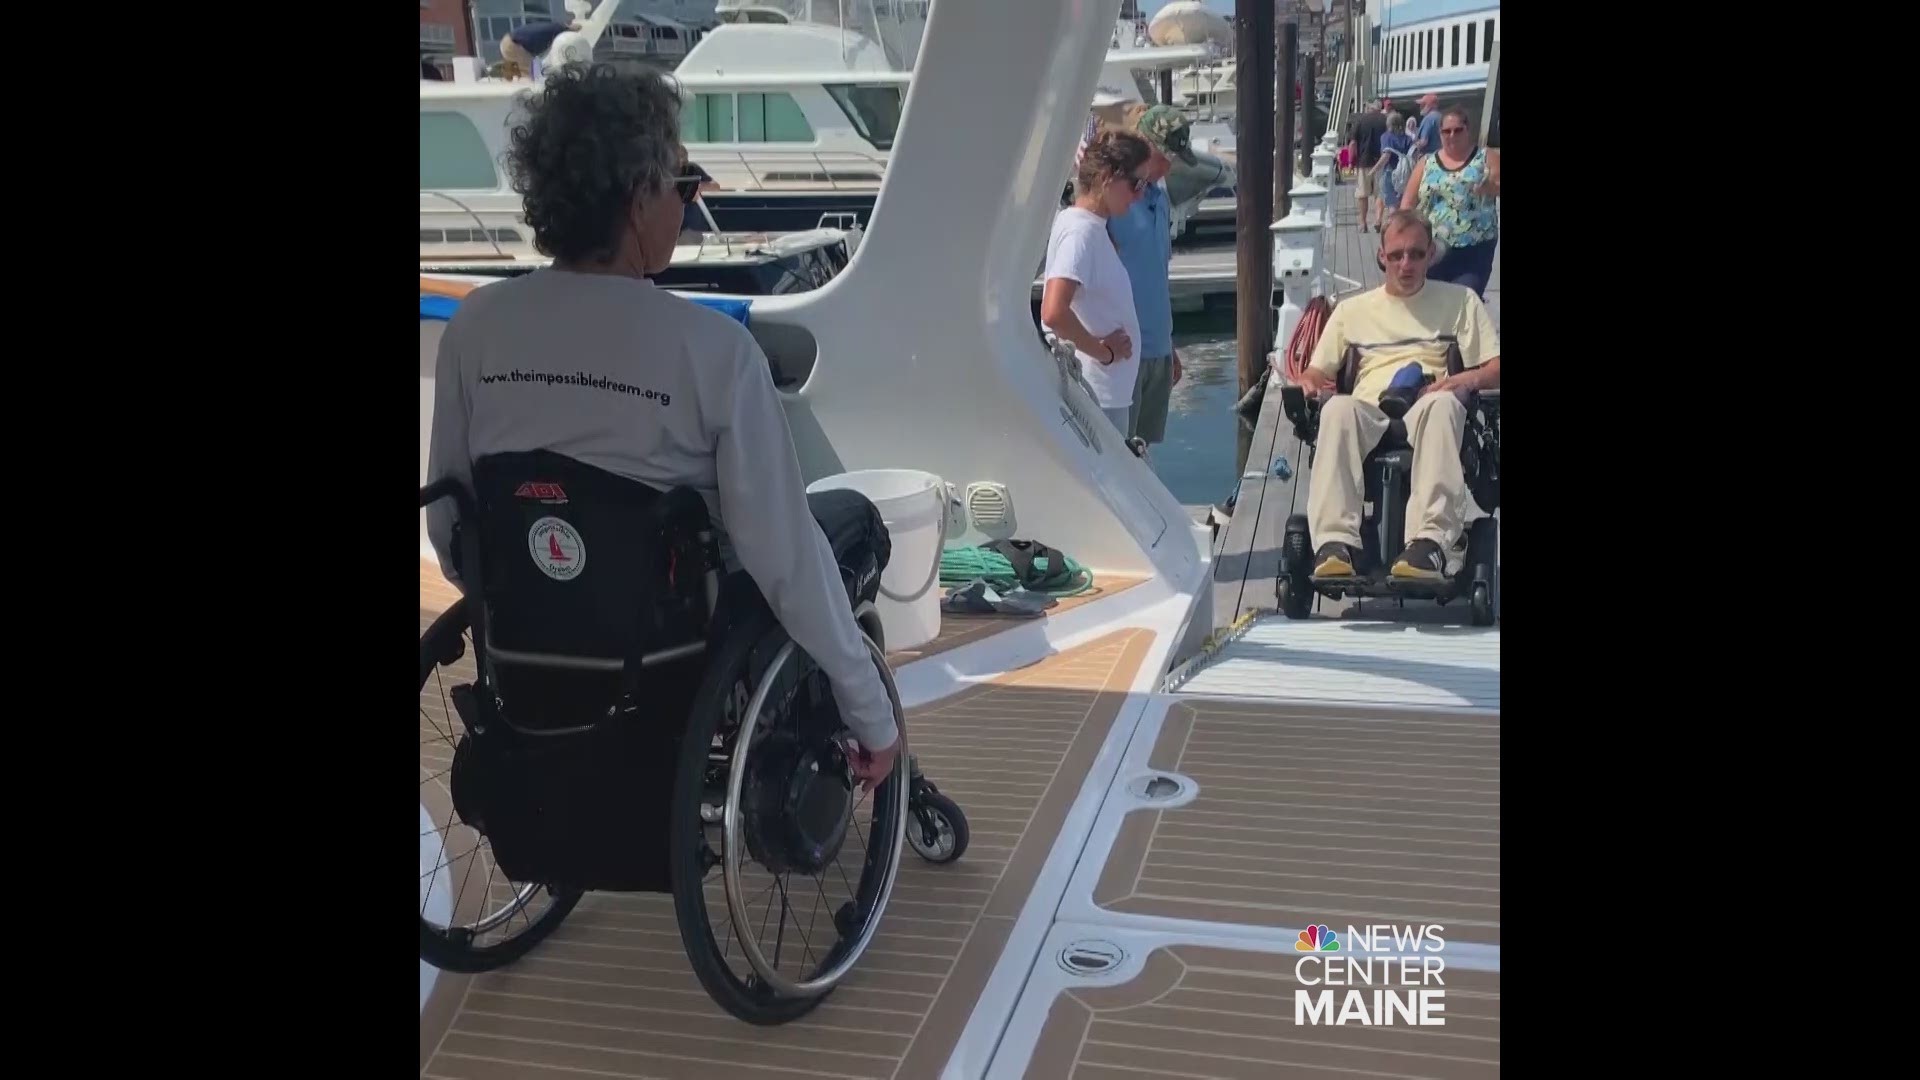 'Impossible Dream' is a universally accessible catamaran that brings new opportunities to people with disabilities around the country.